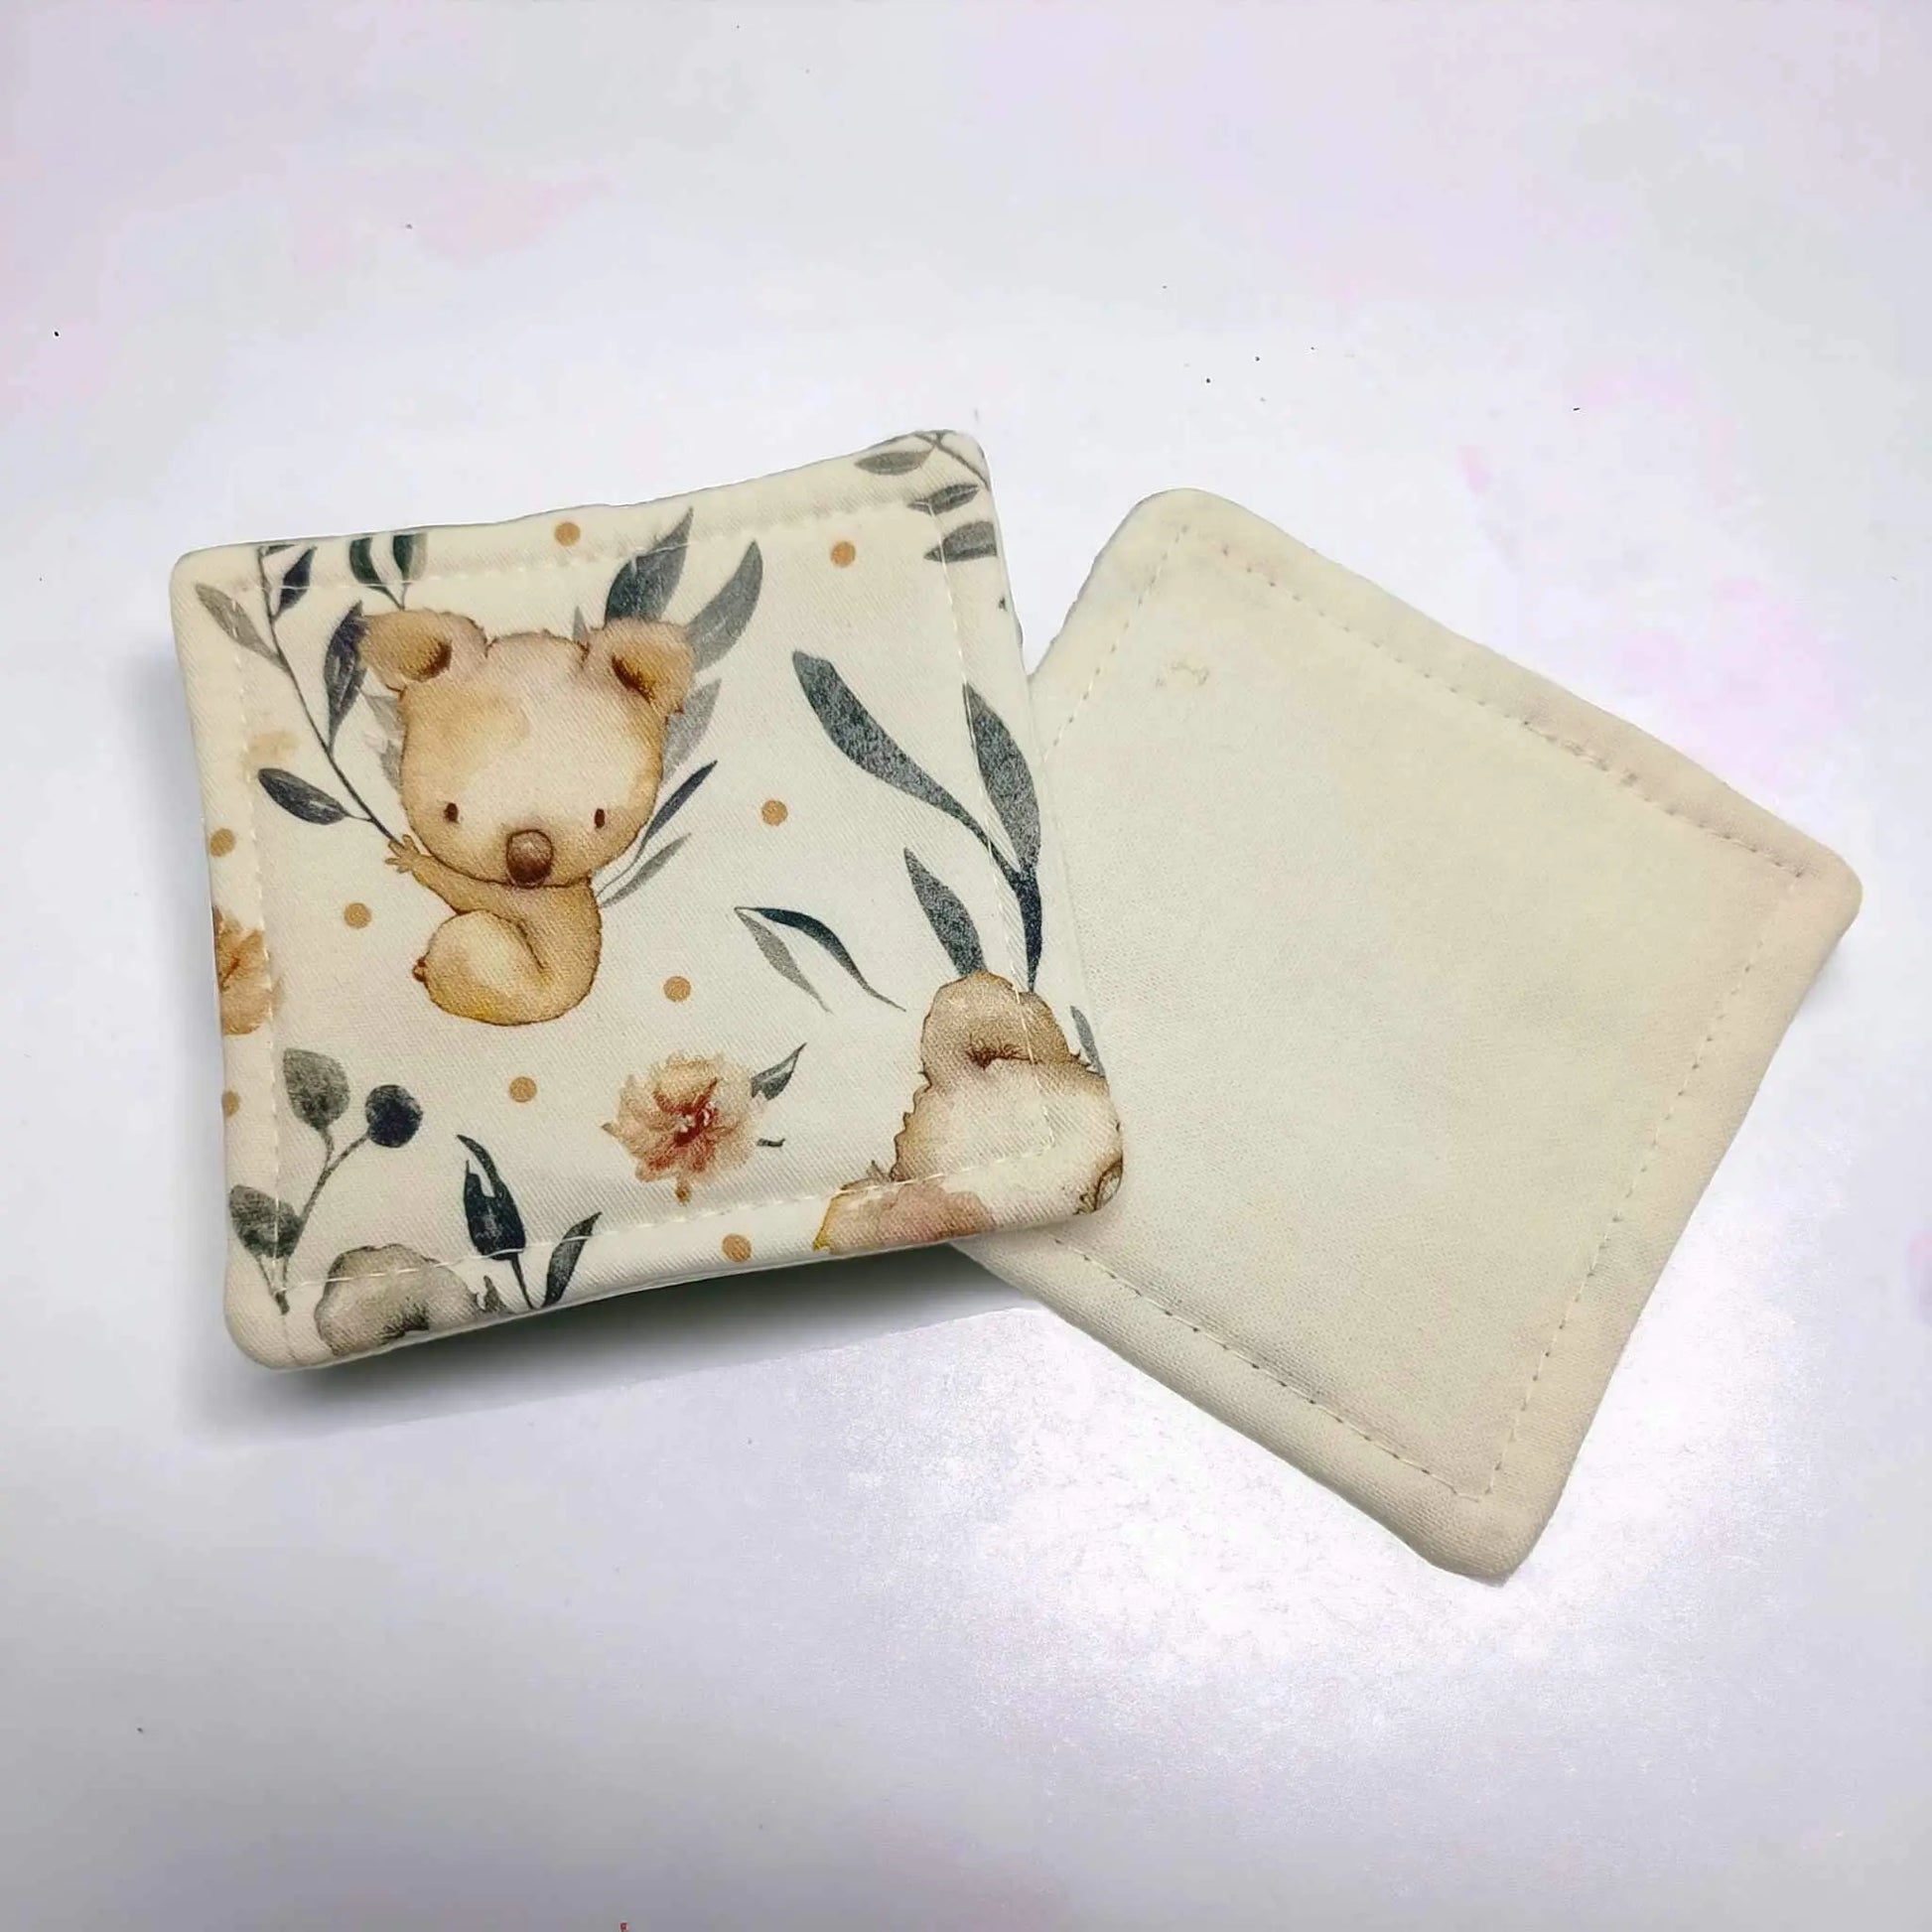 Fawn Koala themed makeup wipes showing front and back. 3 layers - 2 layers cotton with towelling middle. Soft and gentle.